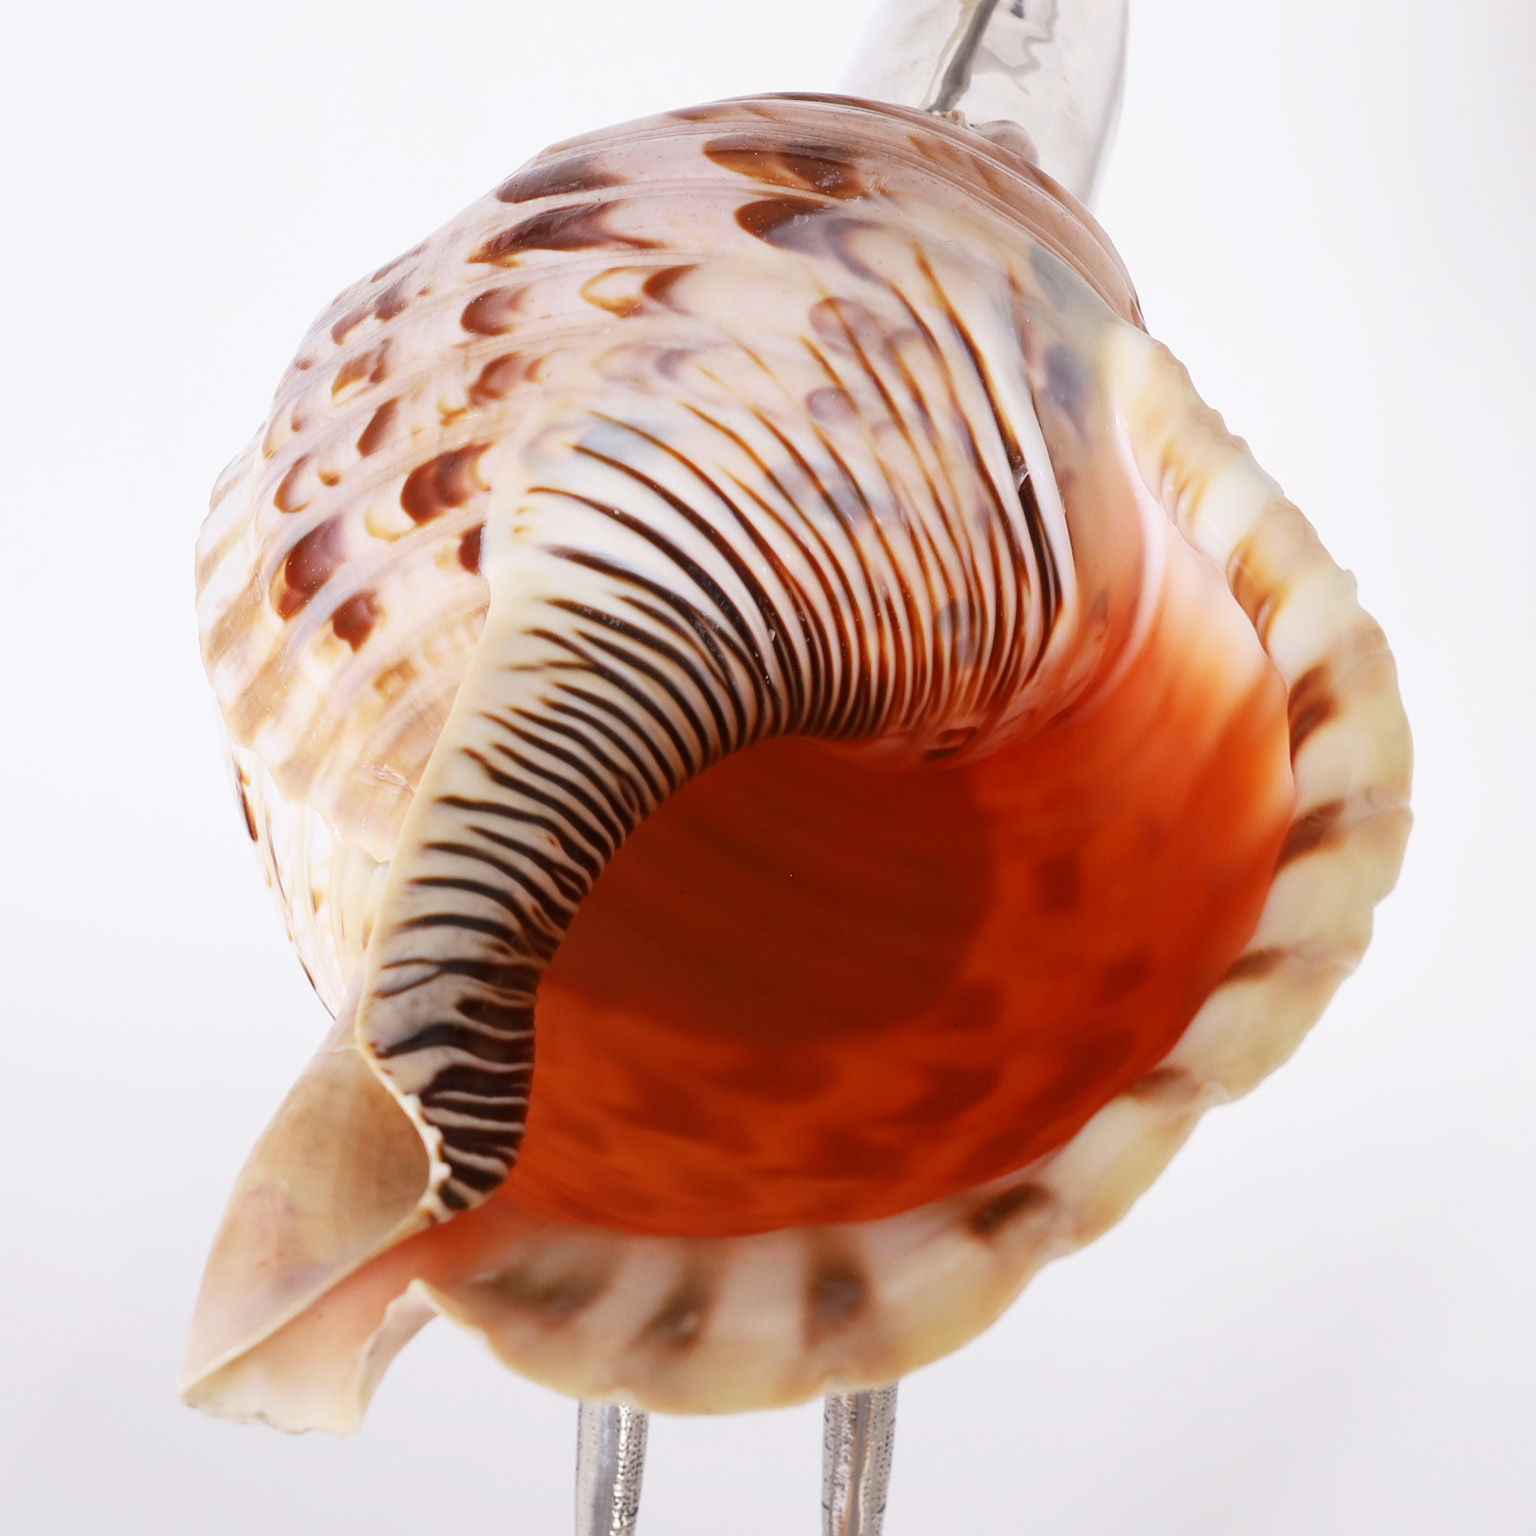 Mid Century Metal and Conch Shell Bird Sculpture by Binazzi